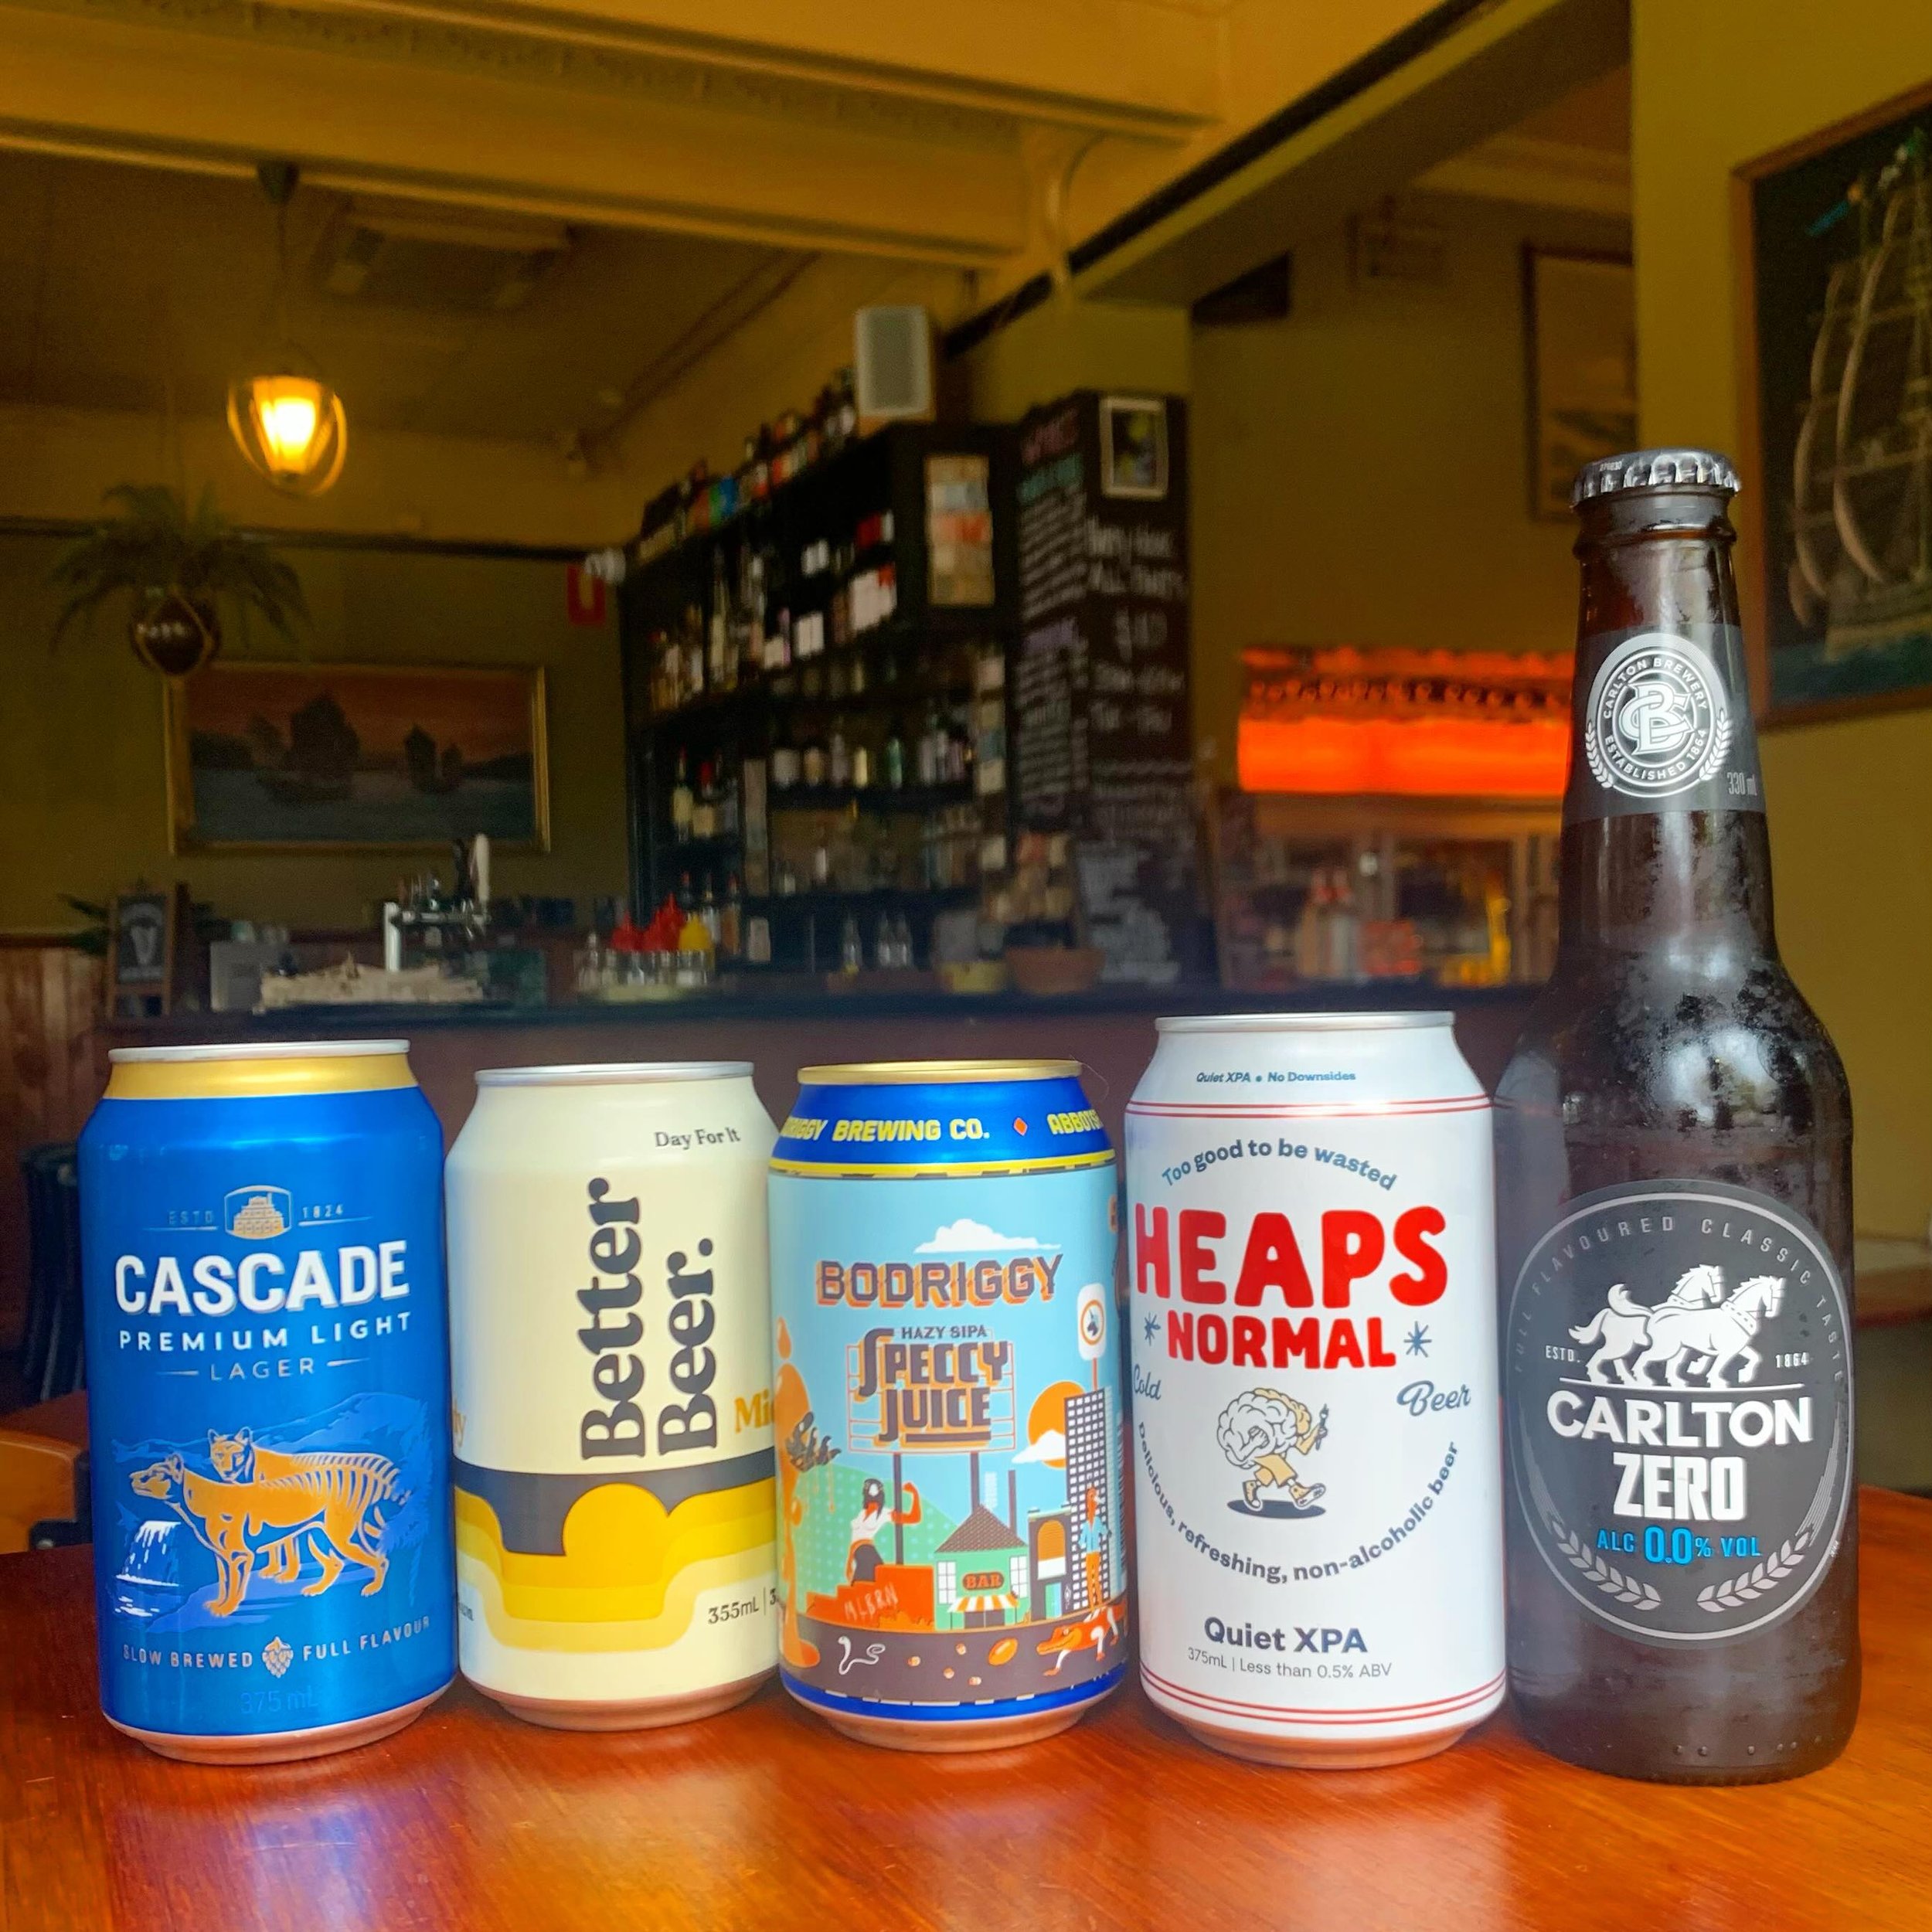 Fancy a chilled one? We got you covered 😎
0% and mids, still perfect with a Parma or a game of pool 🎱

#midstrength #heapsnormal #betterbeer #carlton #bodriggy #fitzroynorth